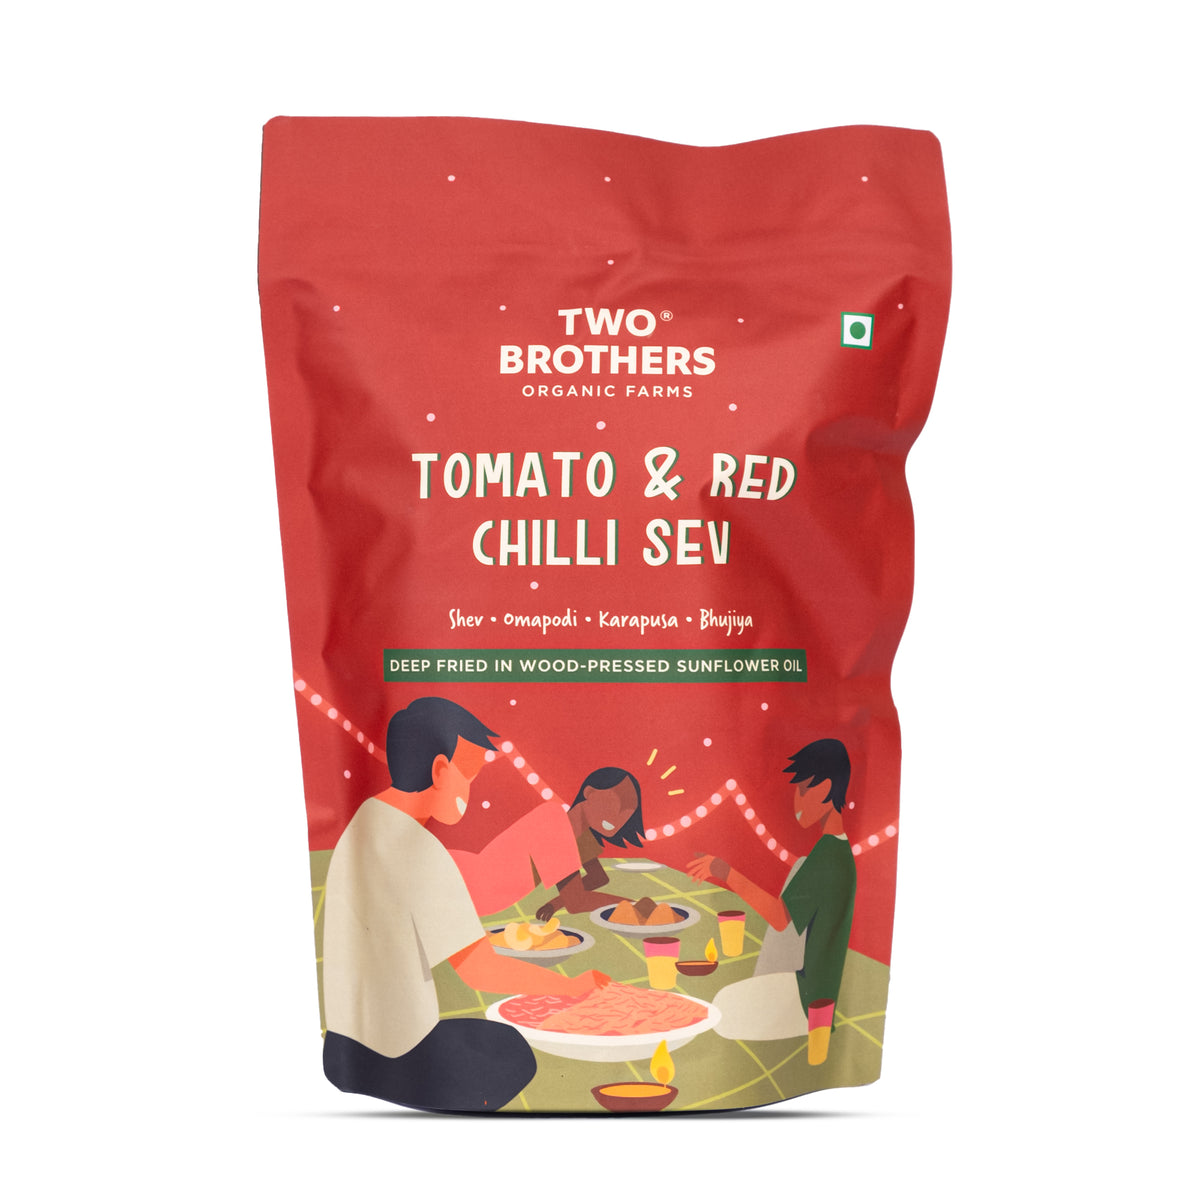 Tomato and Red Chilli Sev